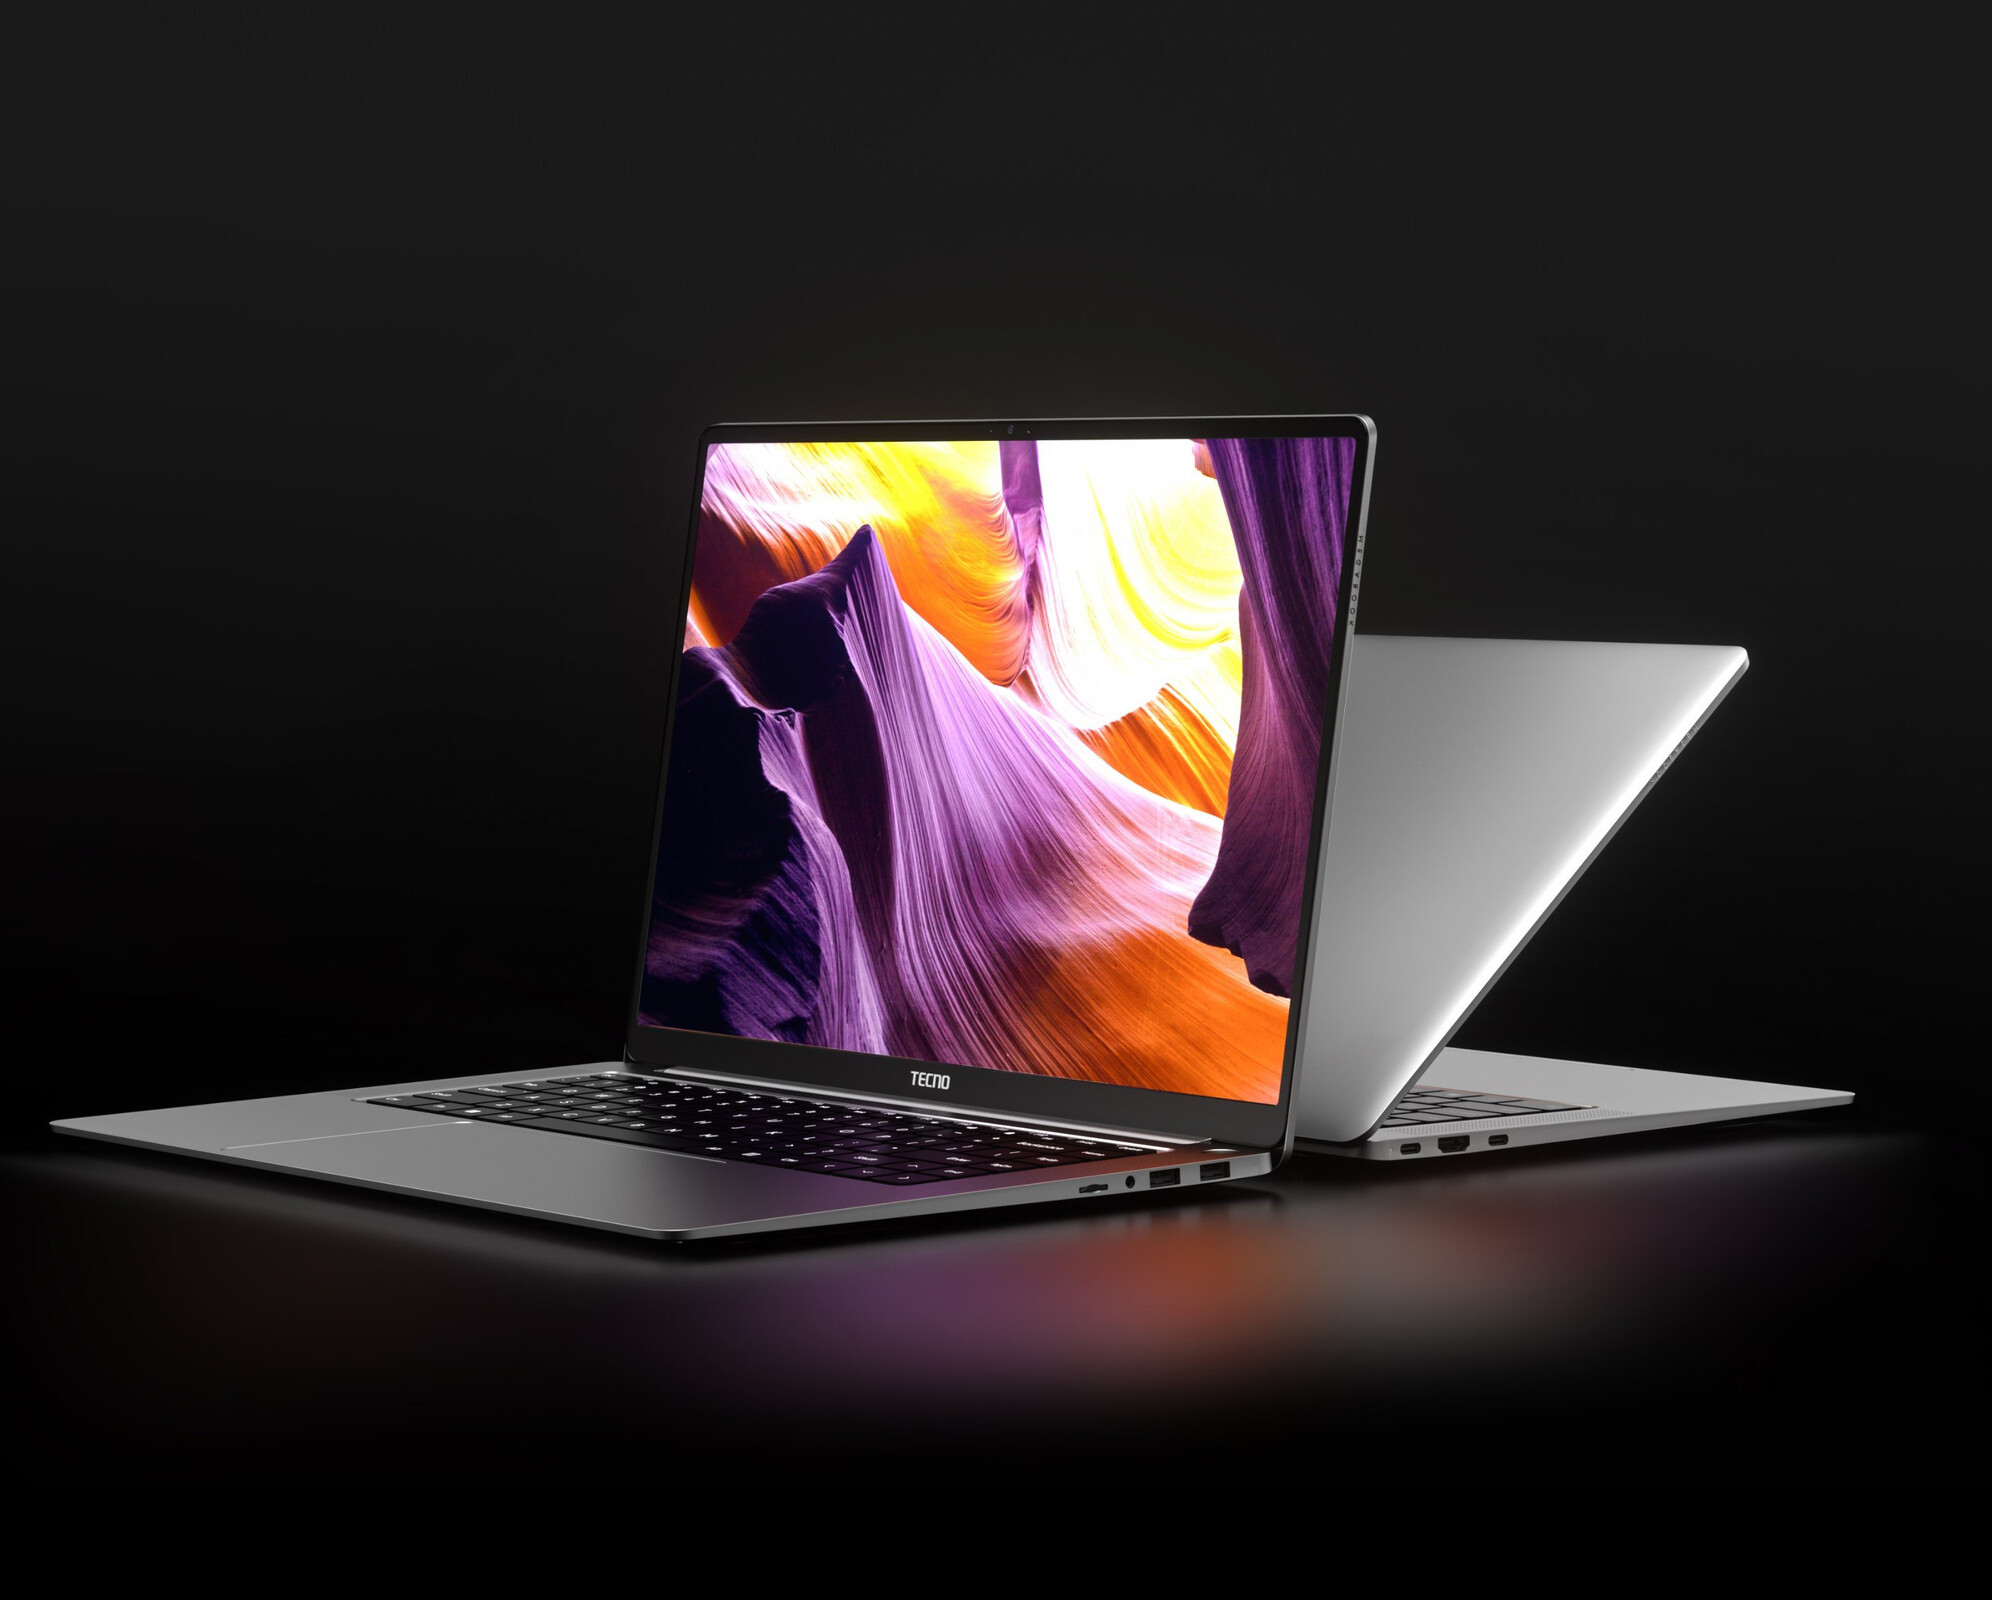 Tecno announces MegaBook S1 thin and light premium 15.6-inch laptop with  Intel Alder Lake i7 processor and 3.2K screen - NotebookCheck.net News